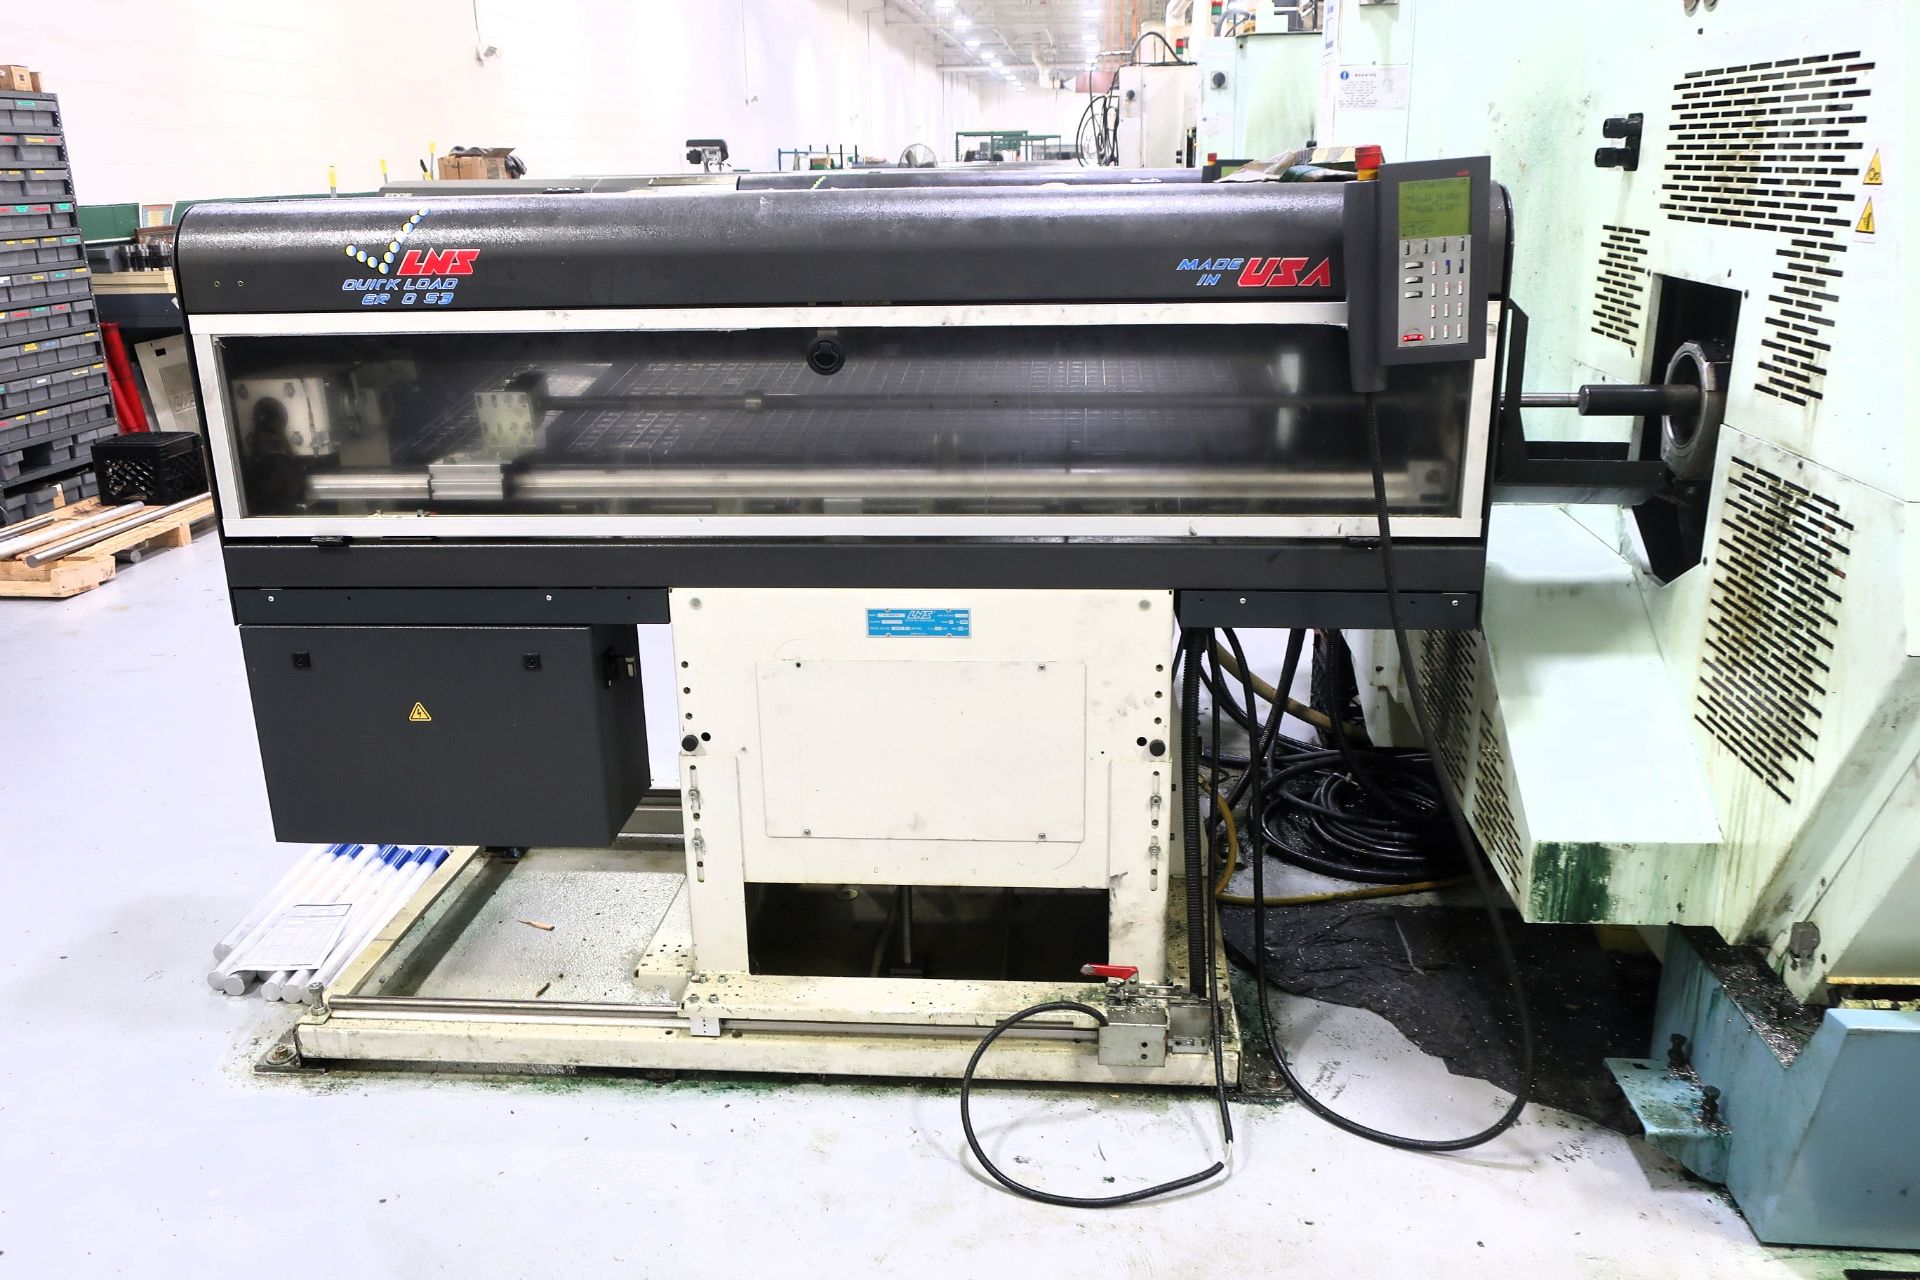 EUROTECH B465 Y2 QUATROFLEX TWIN SPINDLE TWIN TURRET CNC LATHE W/DUAL Y-AXIS, NEW 2011, SN 11045 - Image 13 of 19